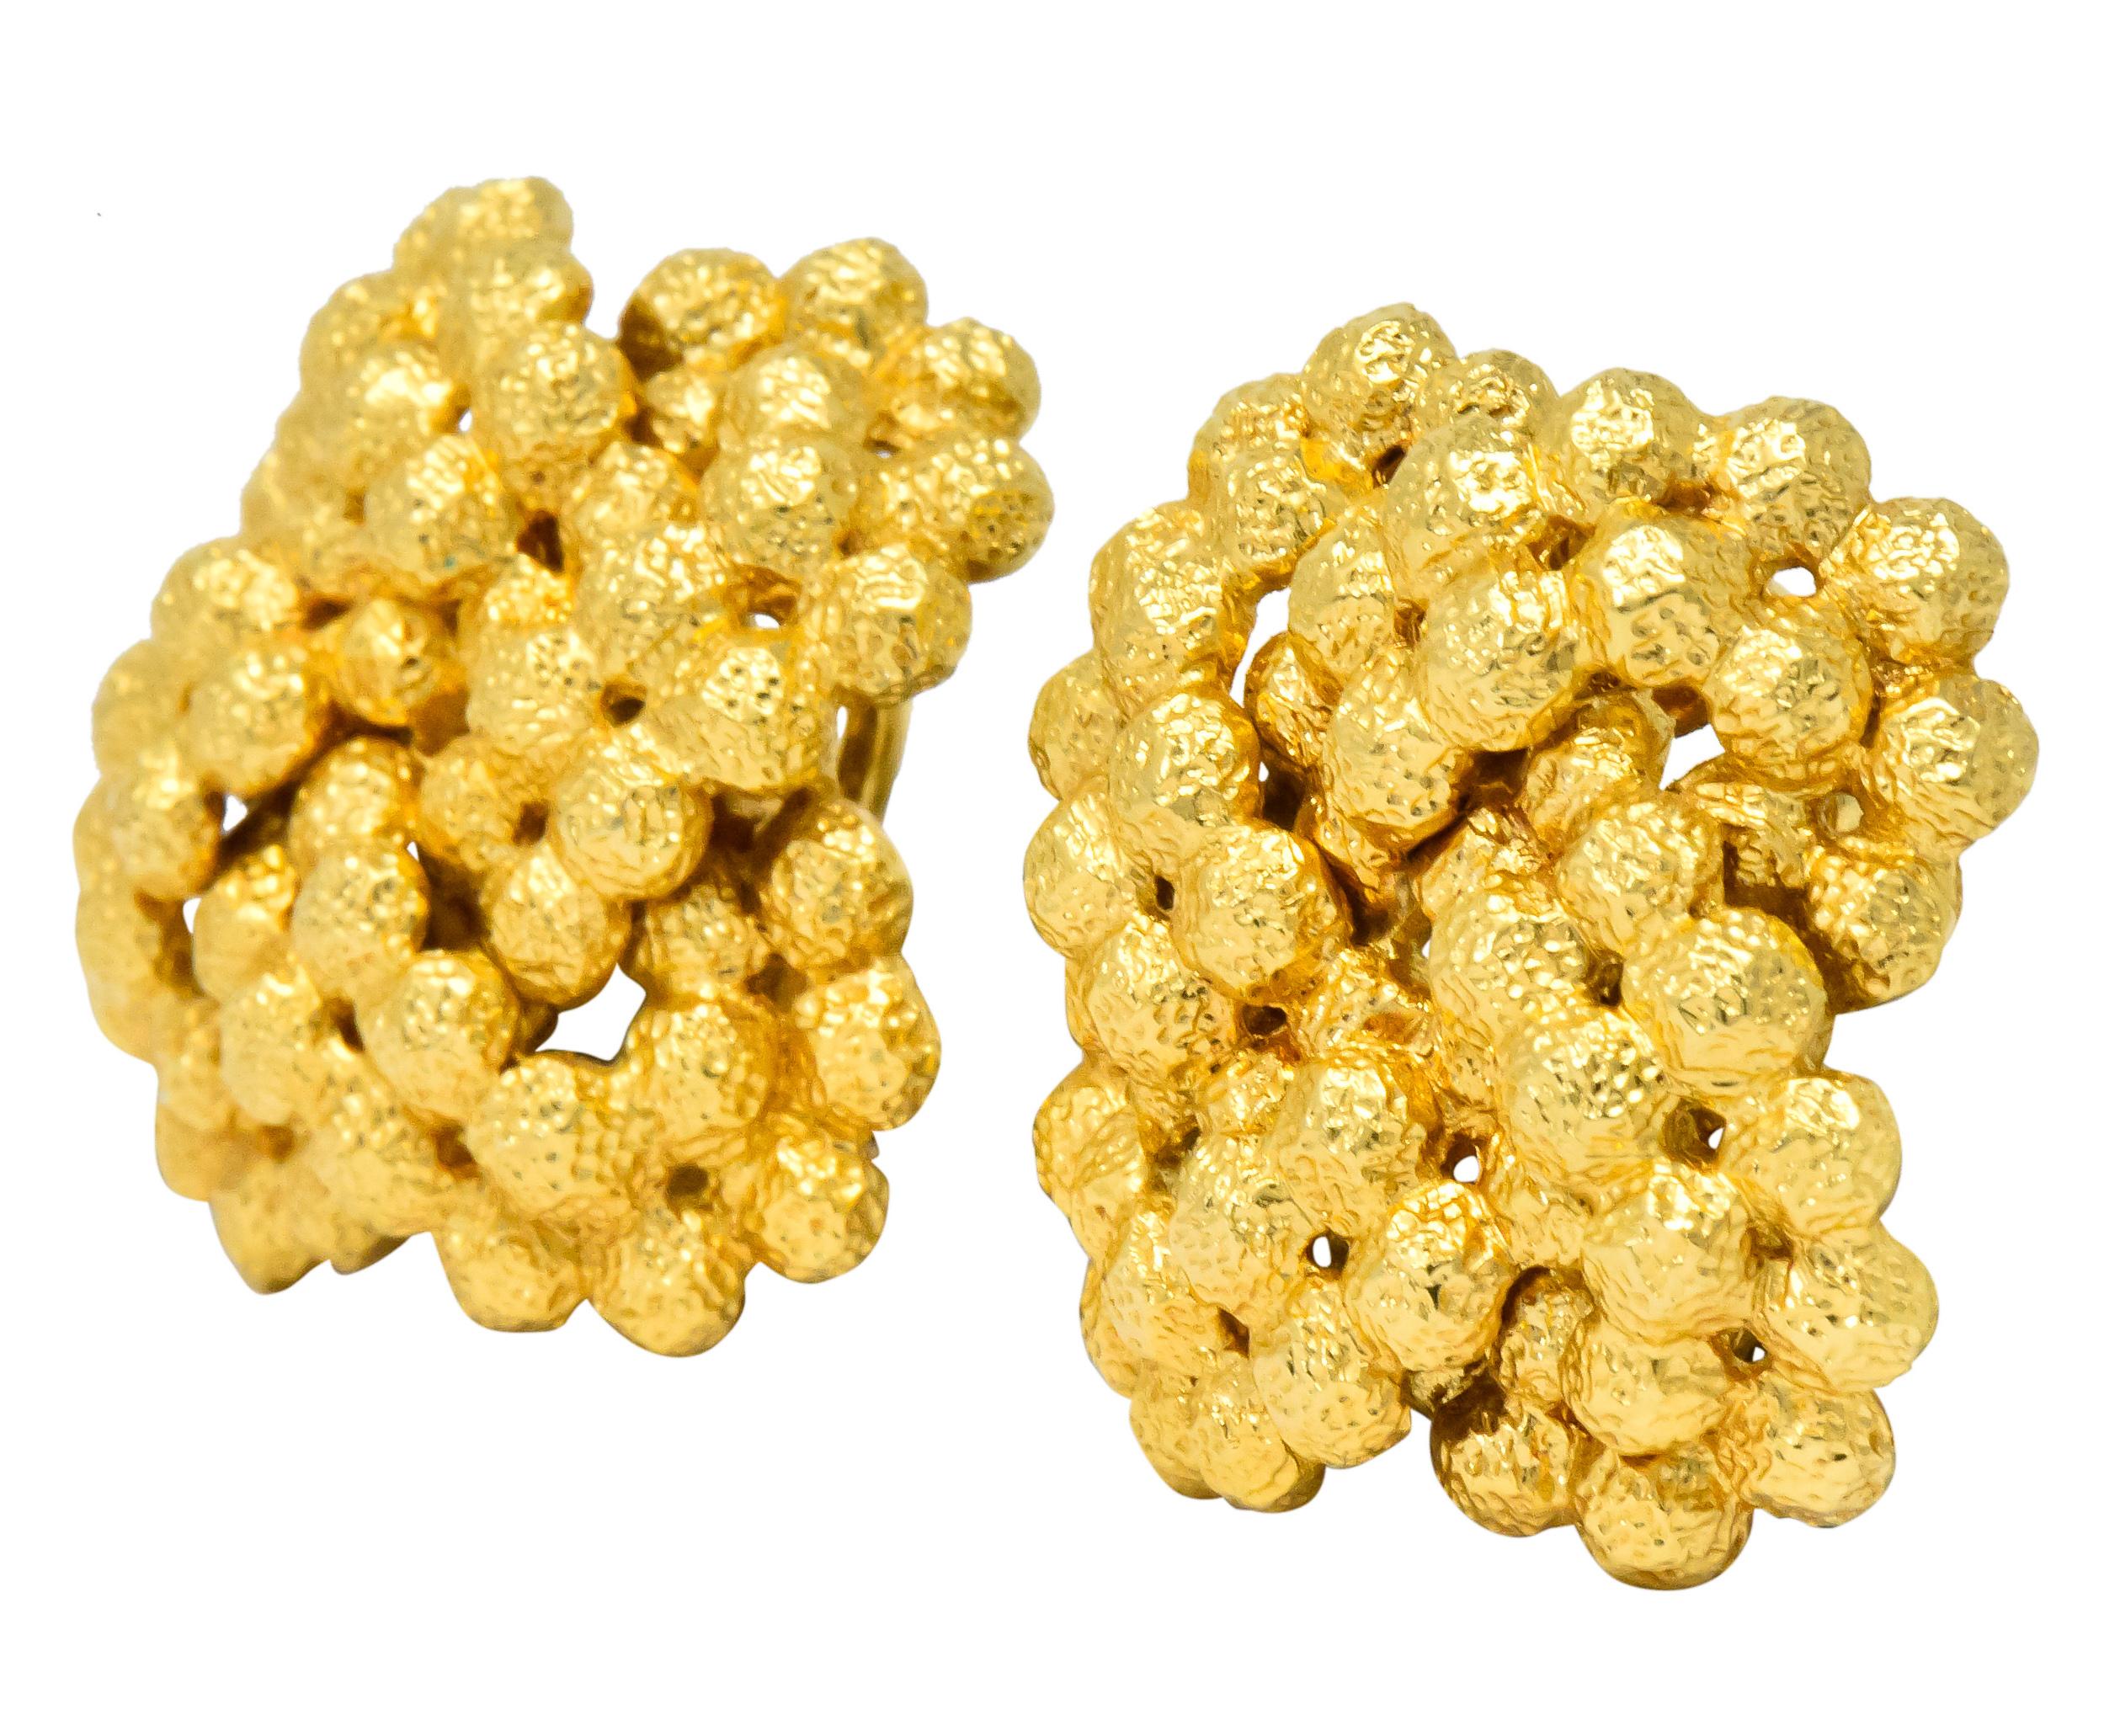 Gold, dimpled bead cluster earrings

Completed with omega hinged clip backs

Fully signed Tiffany & Co.

Stamped Italy and 18kt

Measures: 7/8 inch

Total weight: 15.4 grams

Textured. Lustrous. Bold.
 

 

Stock Number: We-2867